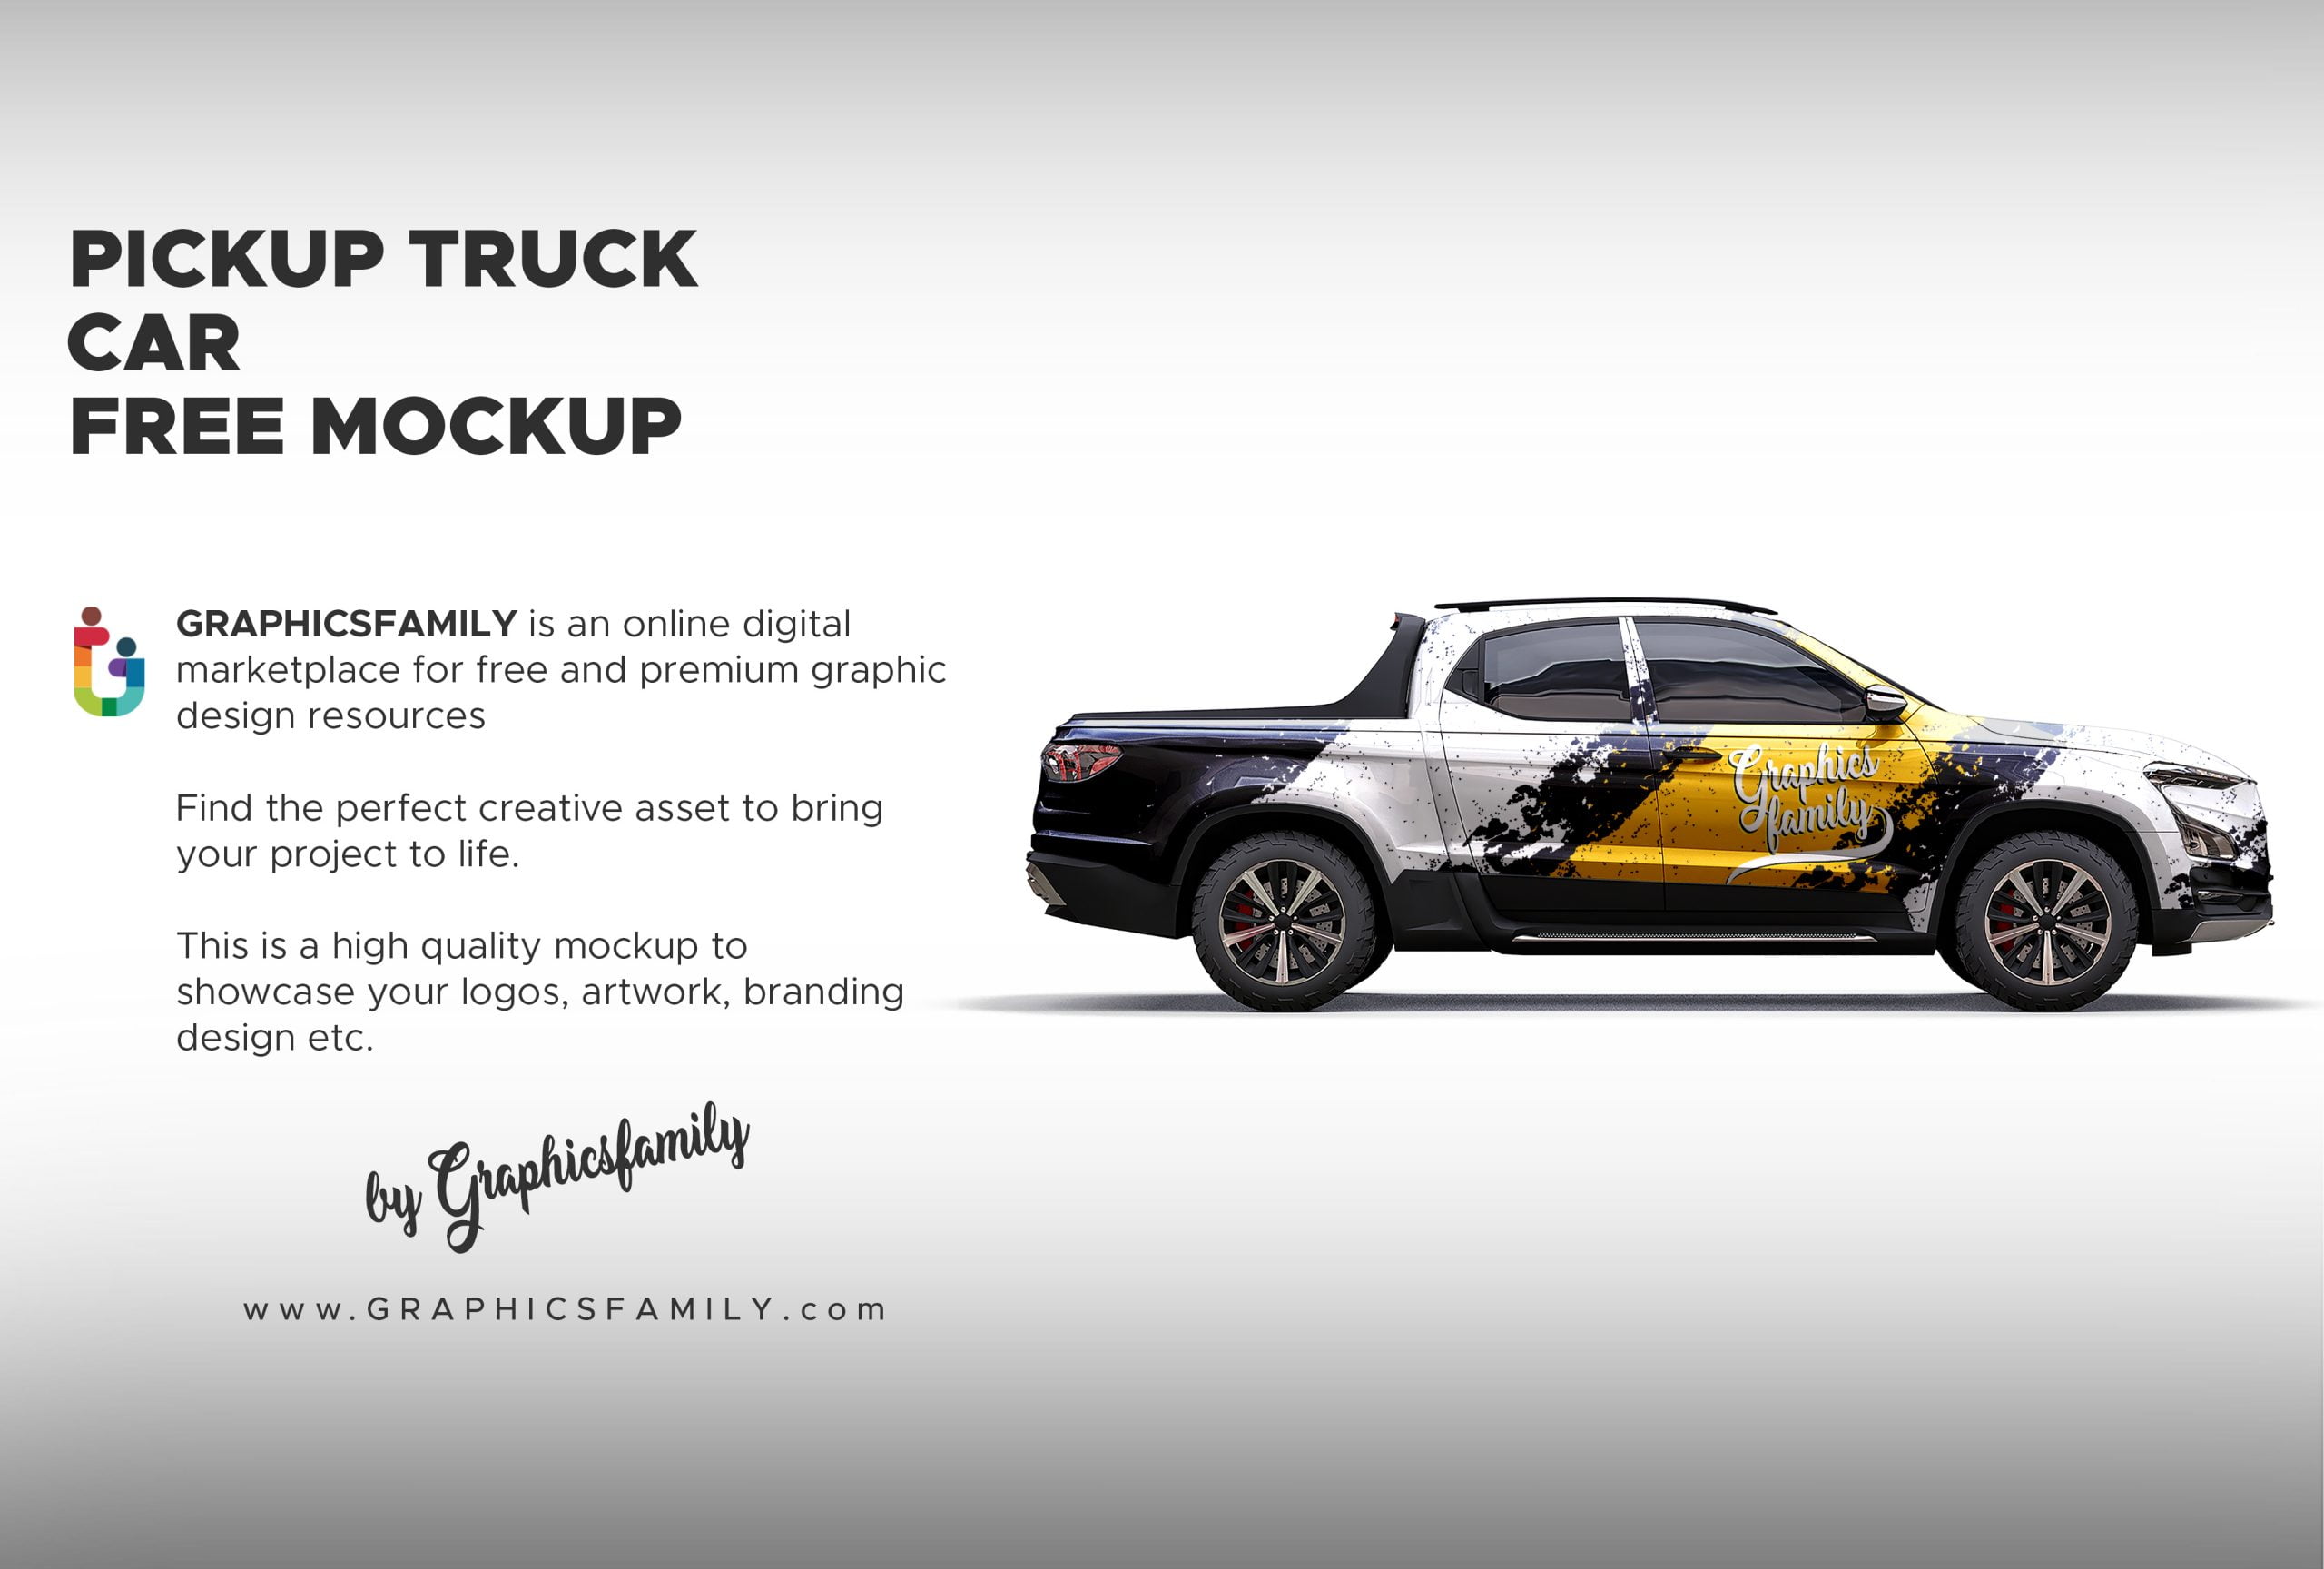 Download Free Pickup Truck Mockup - GraphicsFamily